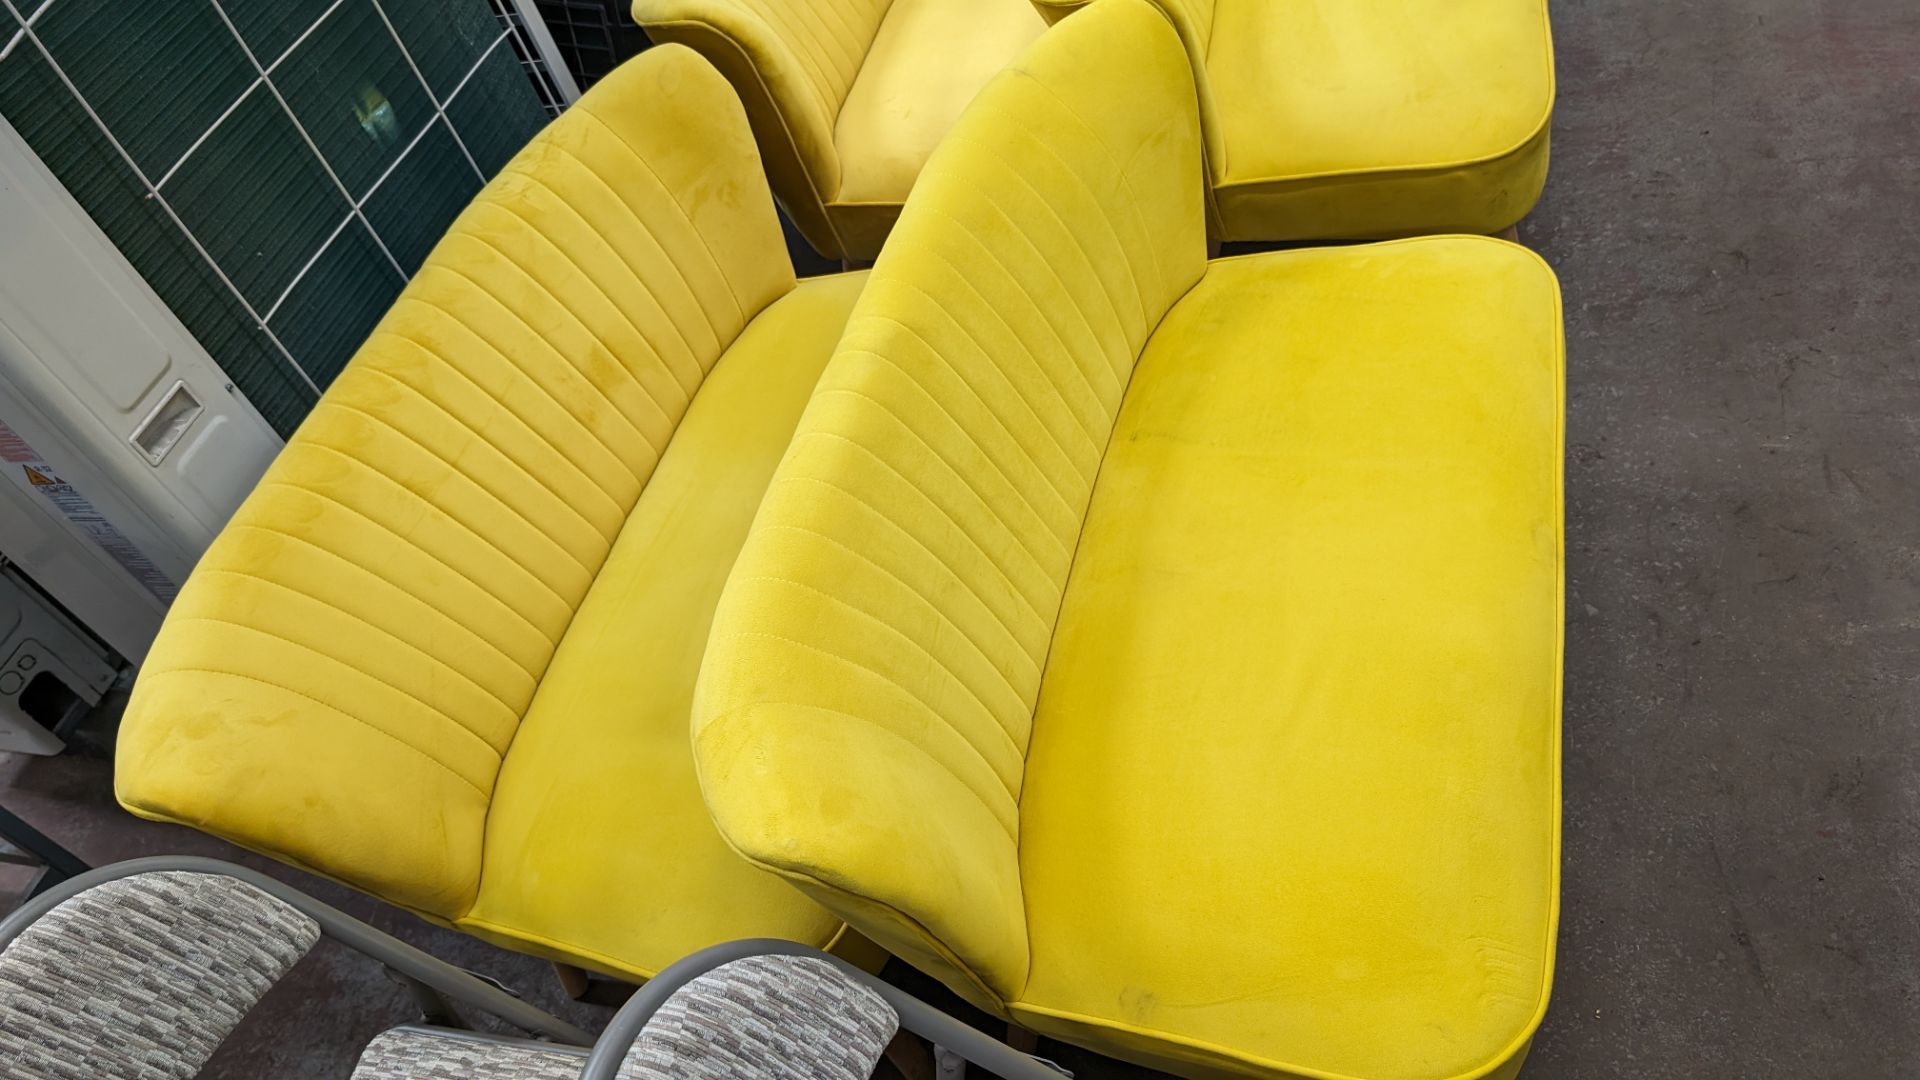 Pair of mustard yellow velour two-person small sofas, each measuring approximately 1120mm wide - Image 6 of 6